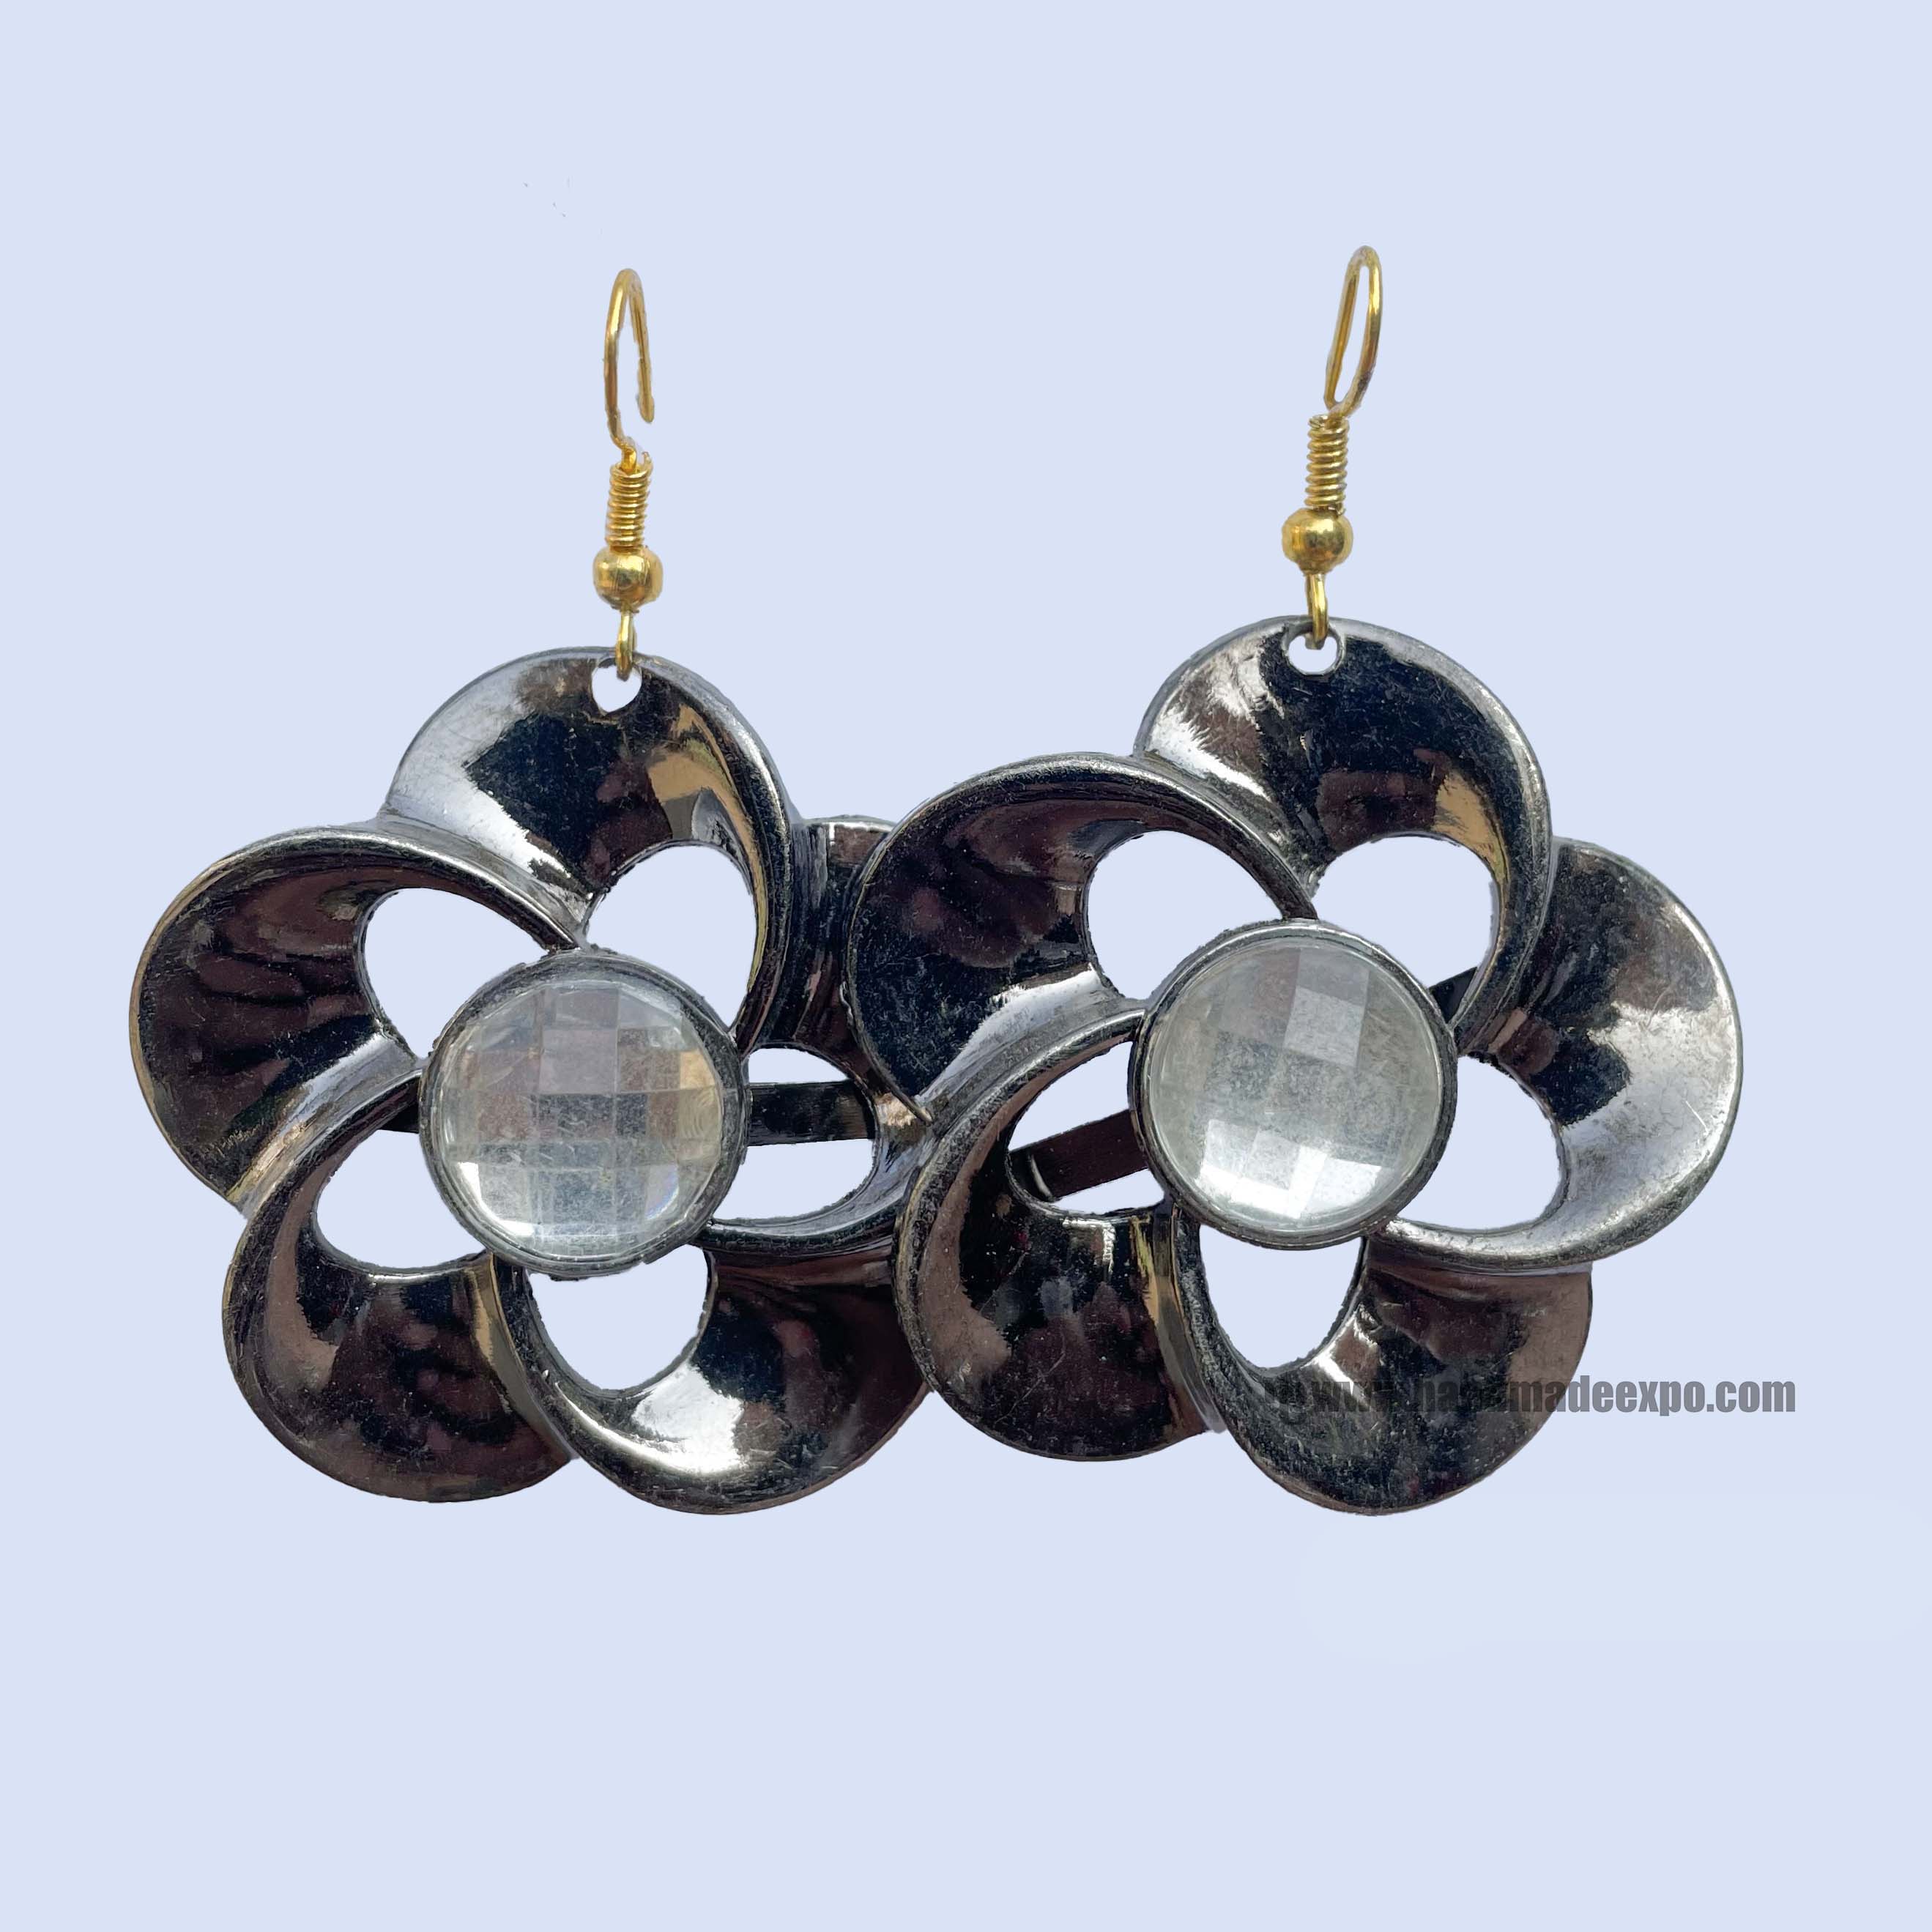 Buy Five Metal Gold Stone Earrings Designs for Daily Use